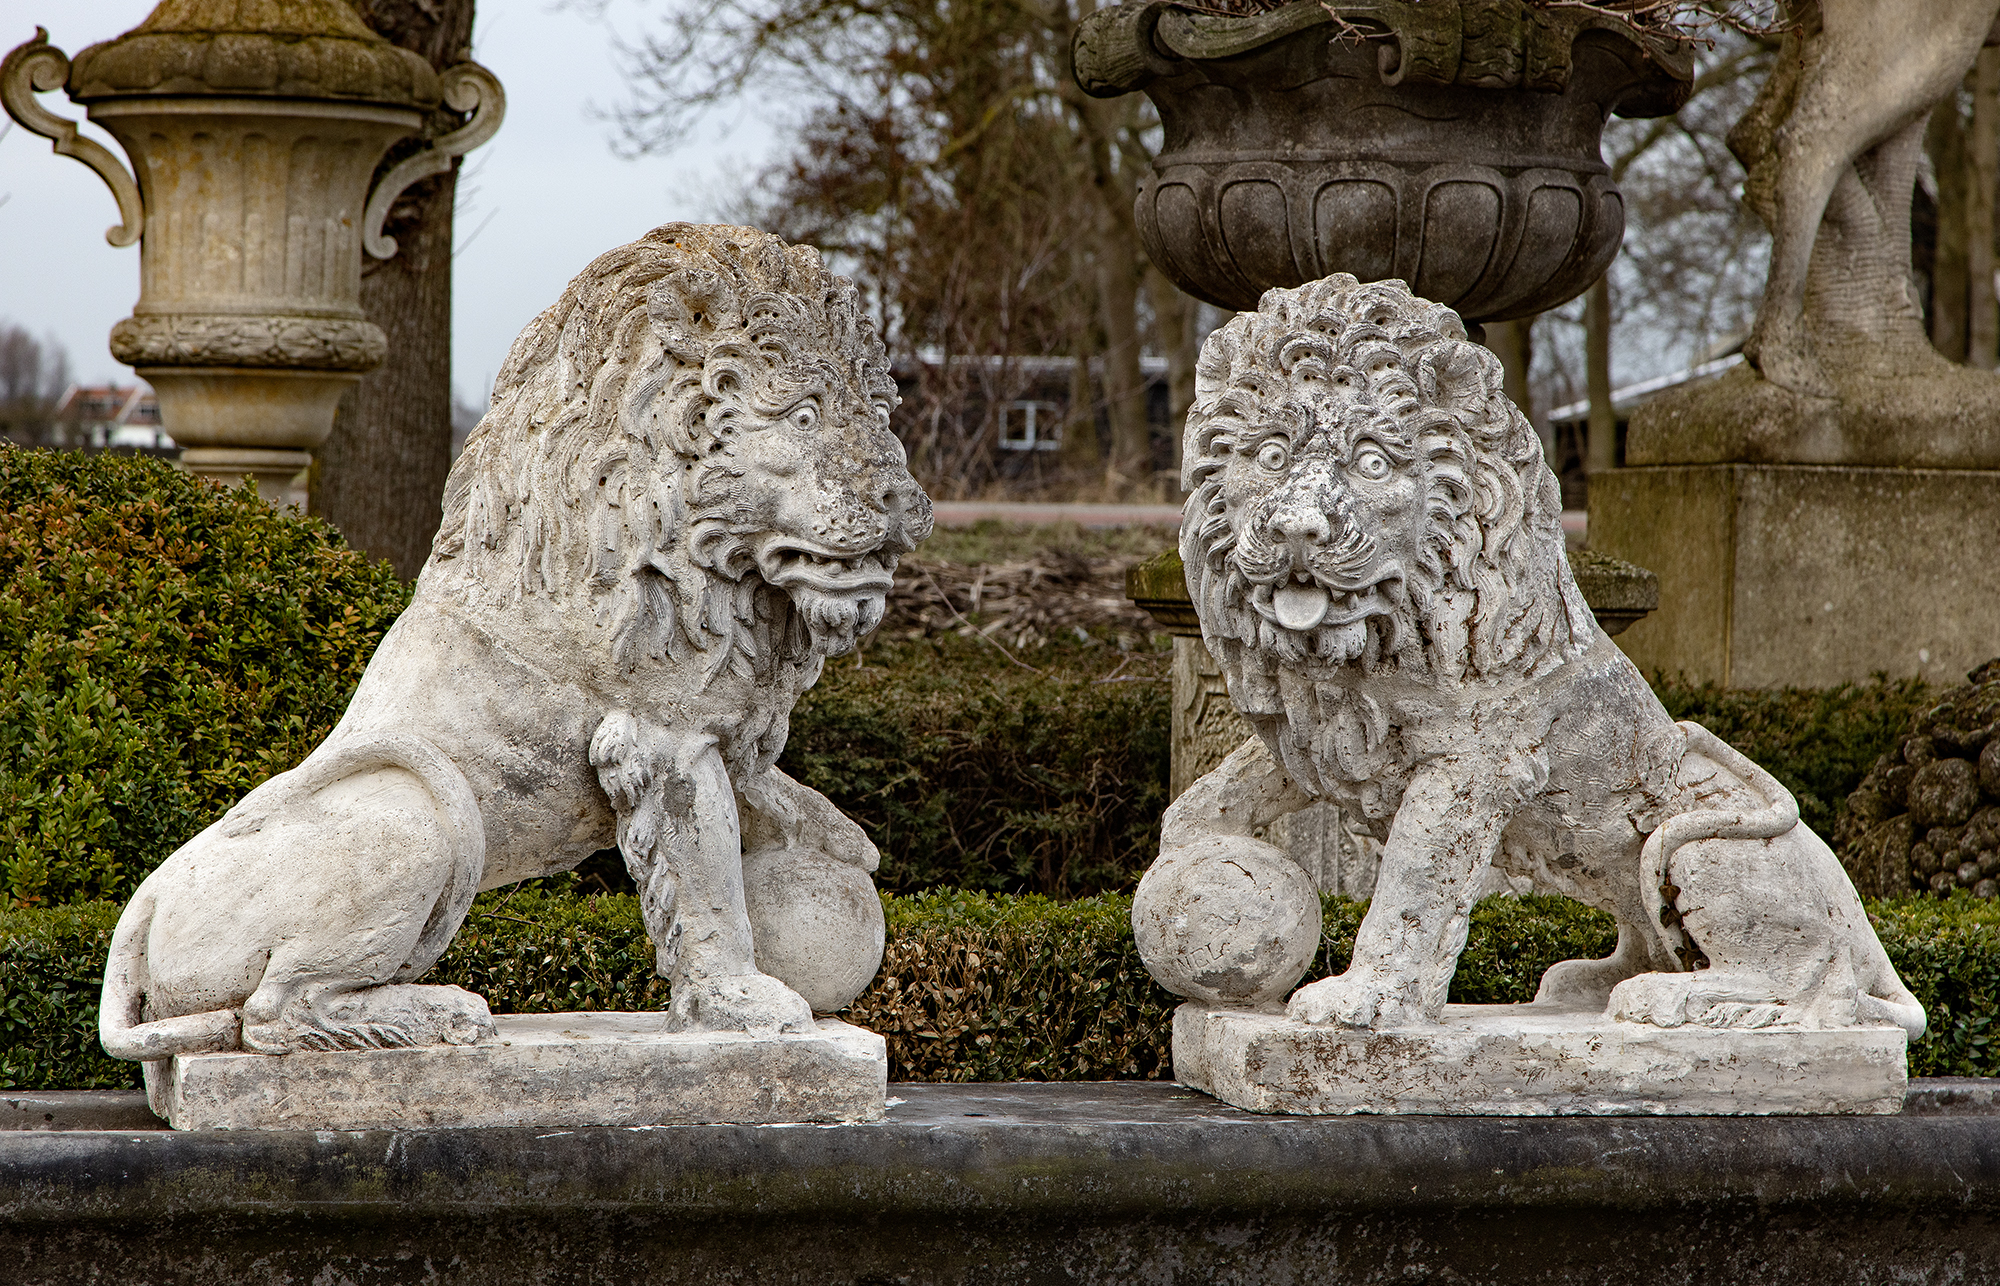 A PAIR OF COMPOSITION STONE MODELS OF LIONS IN THE 17TH CENTURY STYLE, LATE 19TH CENTURY